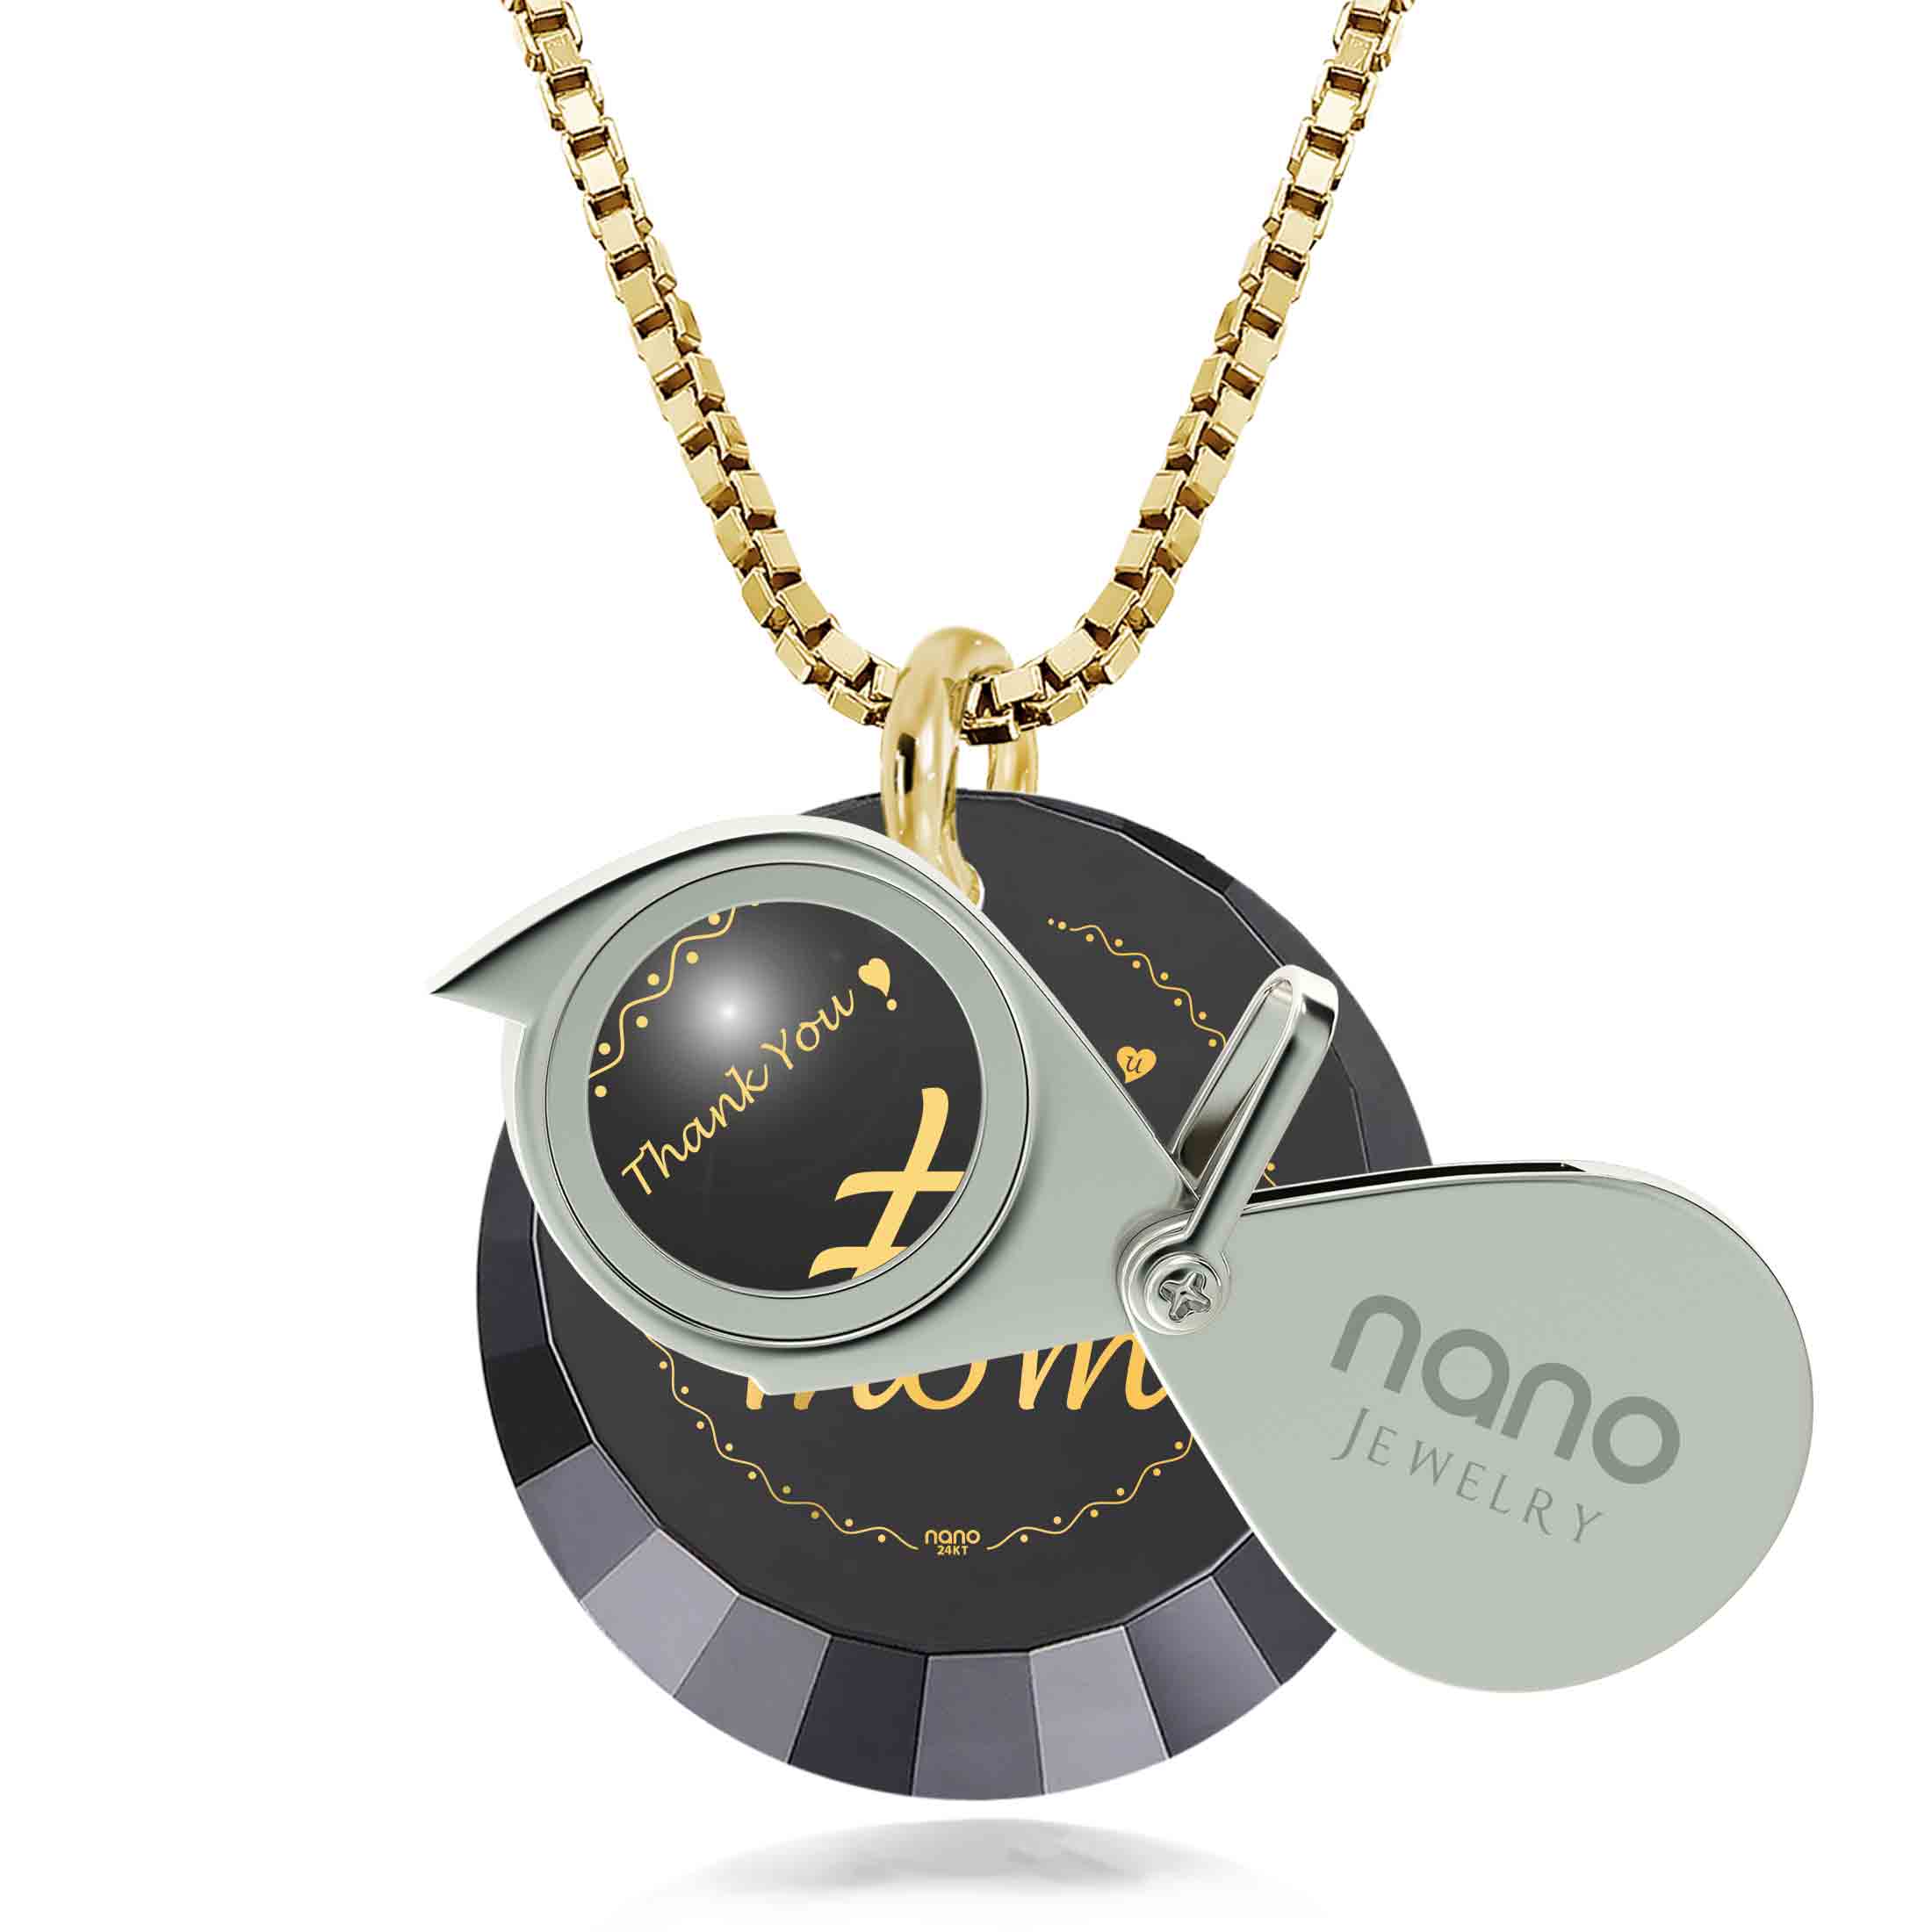 Round pendant with "Number One Mom" in gold script on a black background, encircled by a golden dotted line and decorative hearts, making it a unique gift.